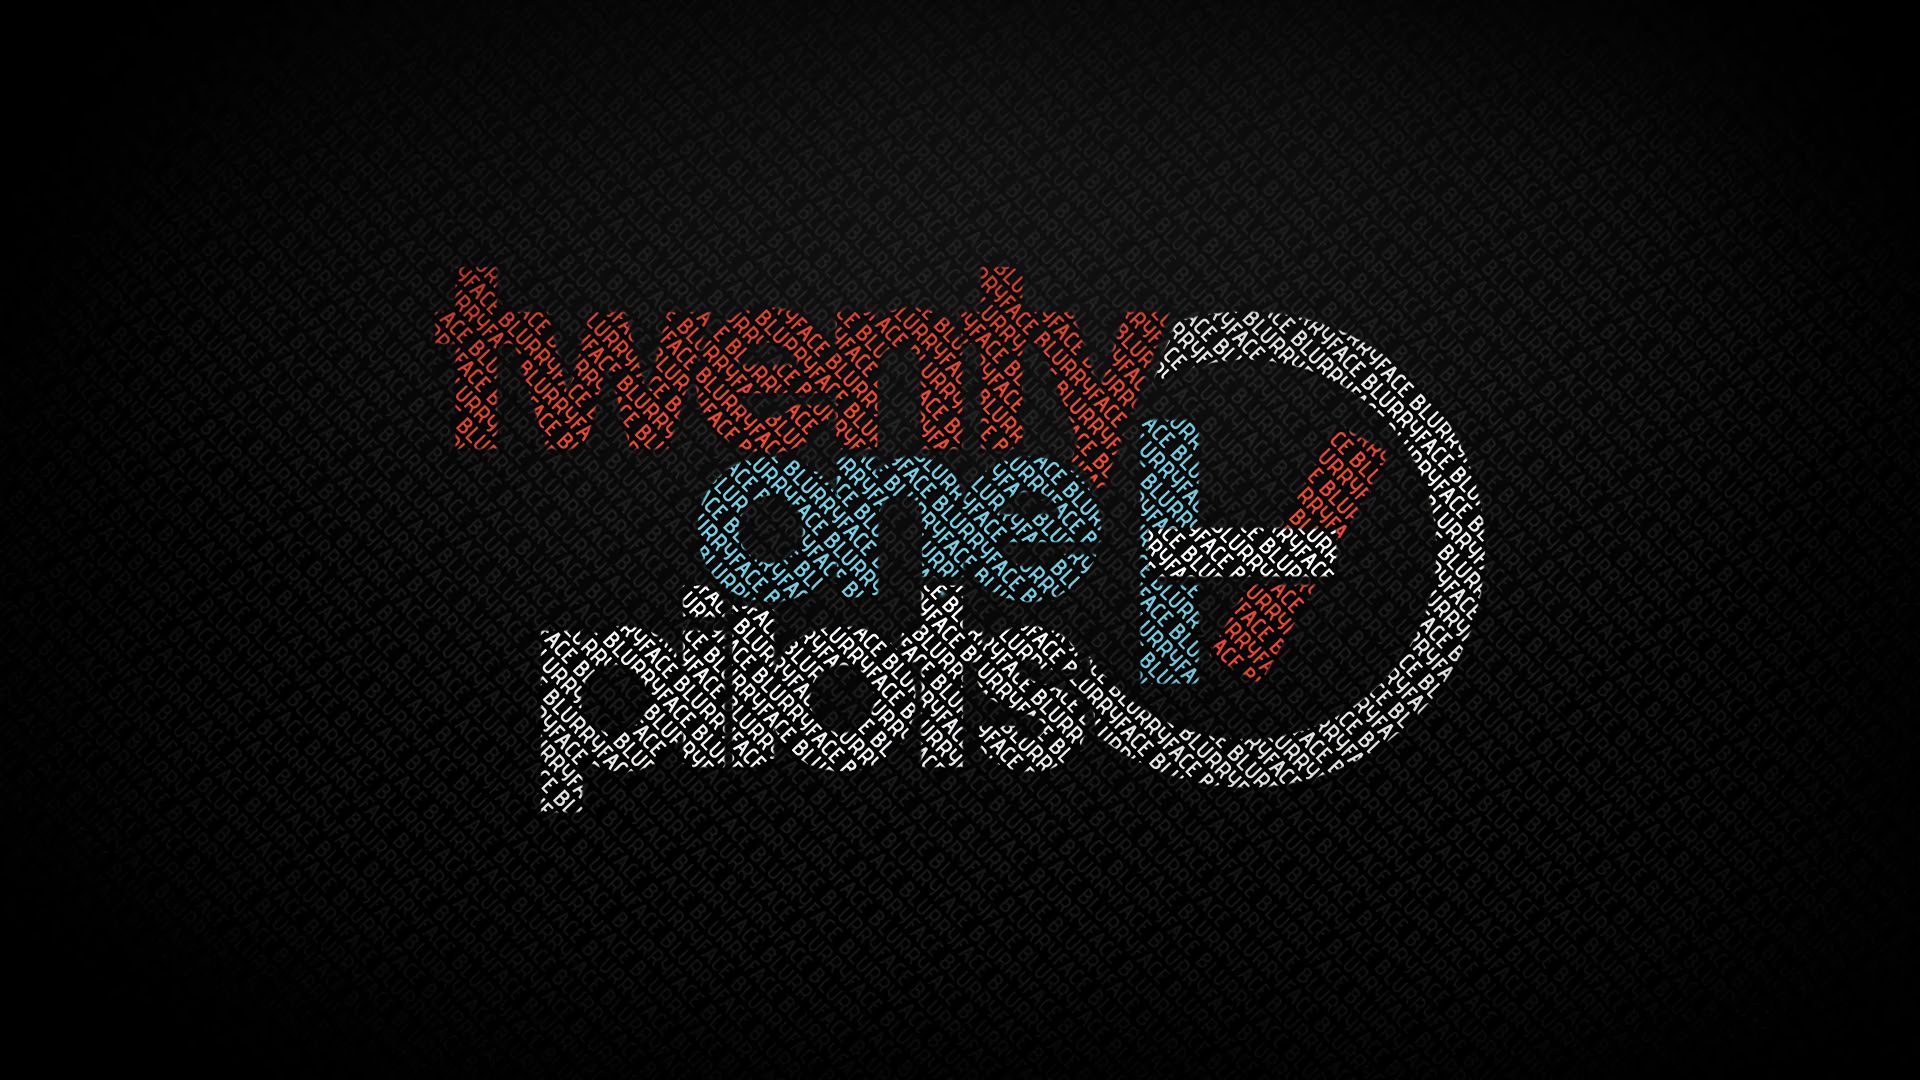 Another Phone Wallpaper for all the Pilots  rtwentyonepilots